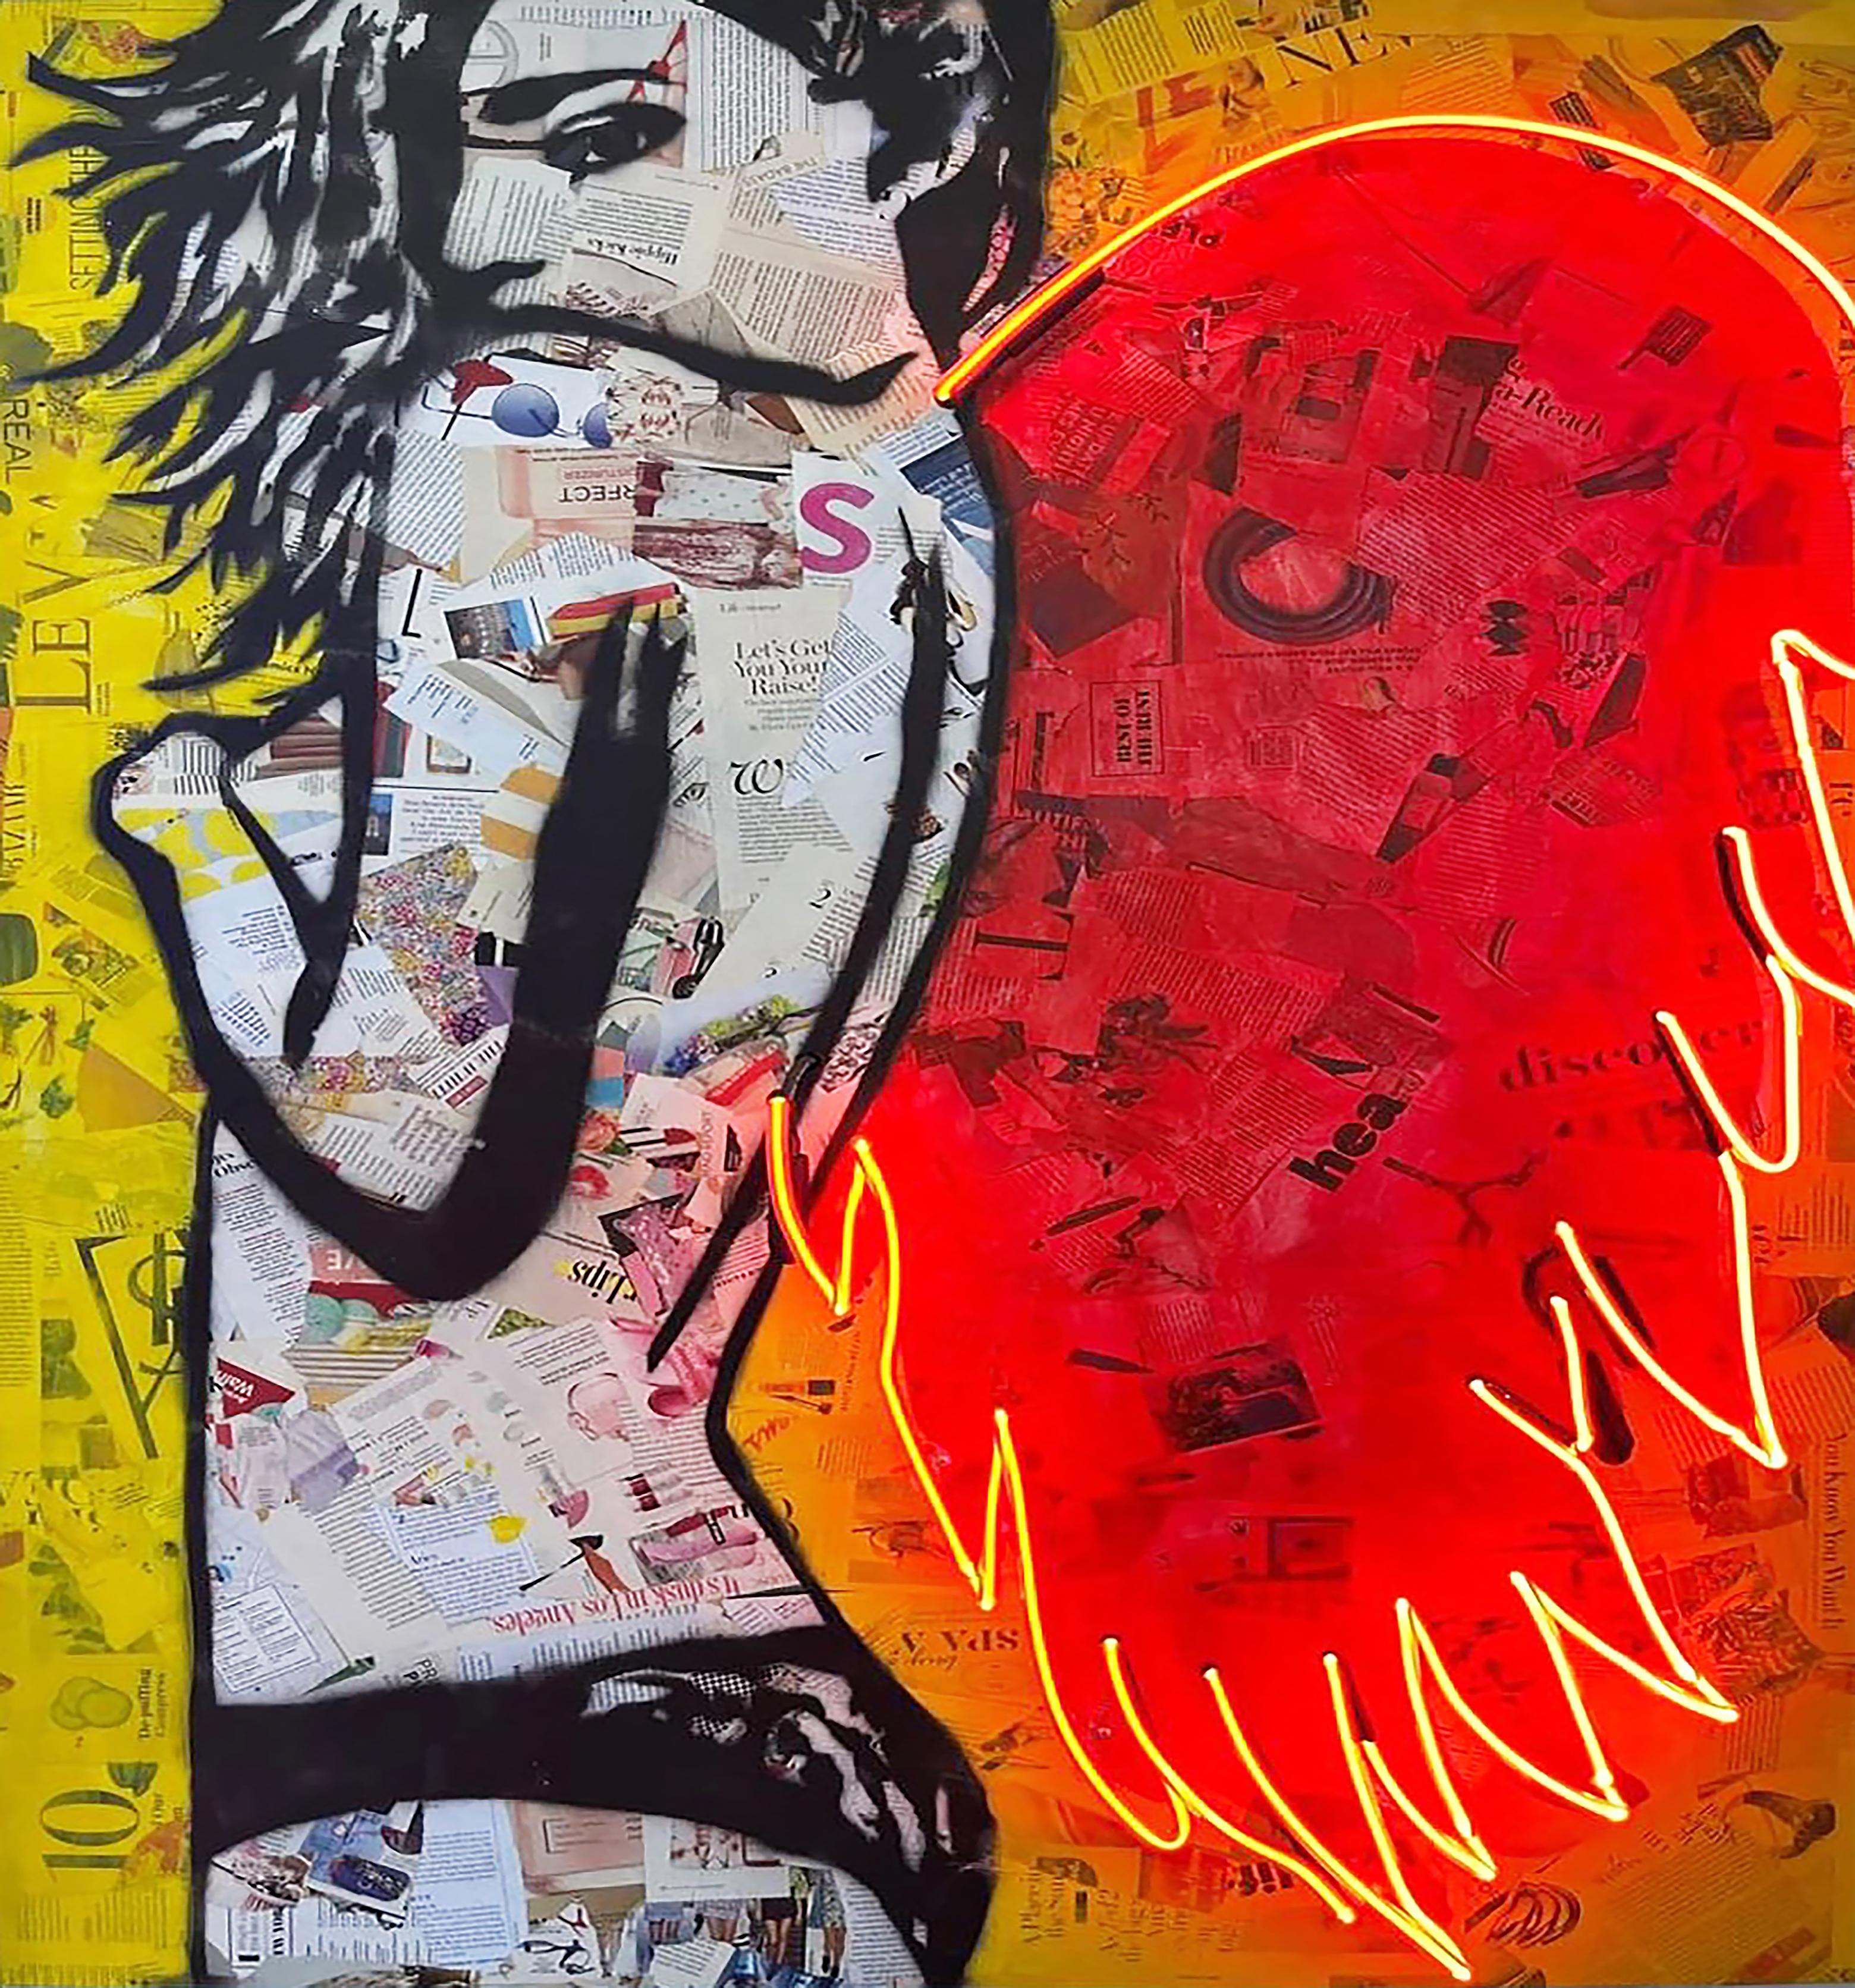 Amy Smith Figurative Painting - "Devilish"  mixed media collage on wood with neon 